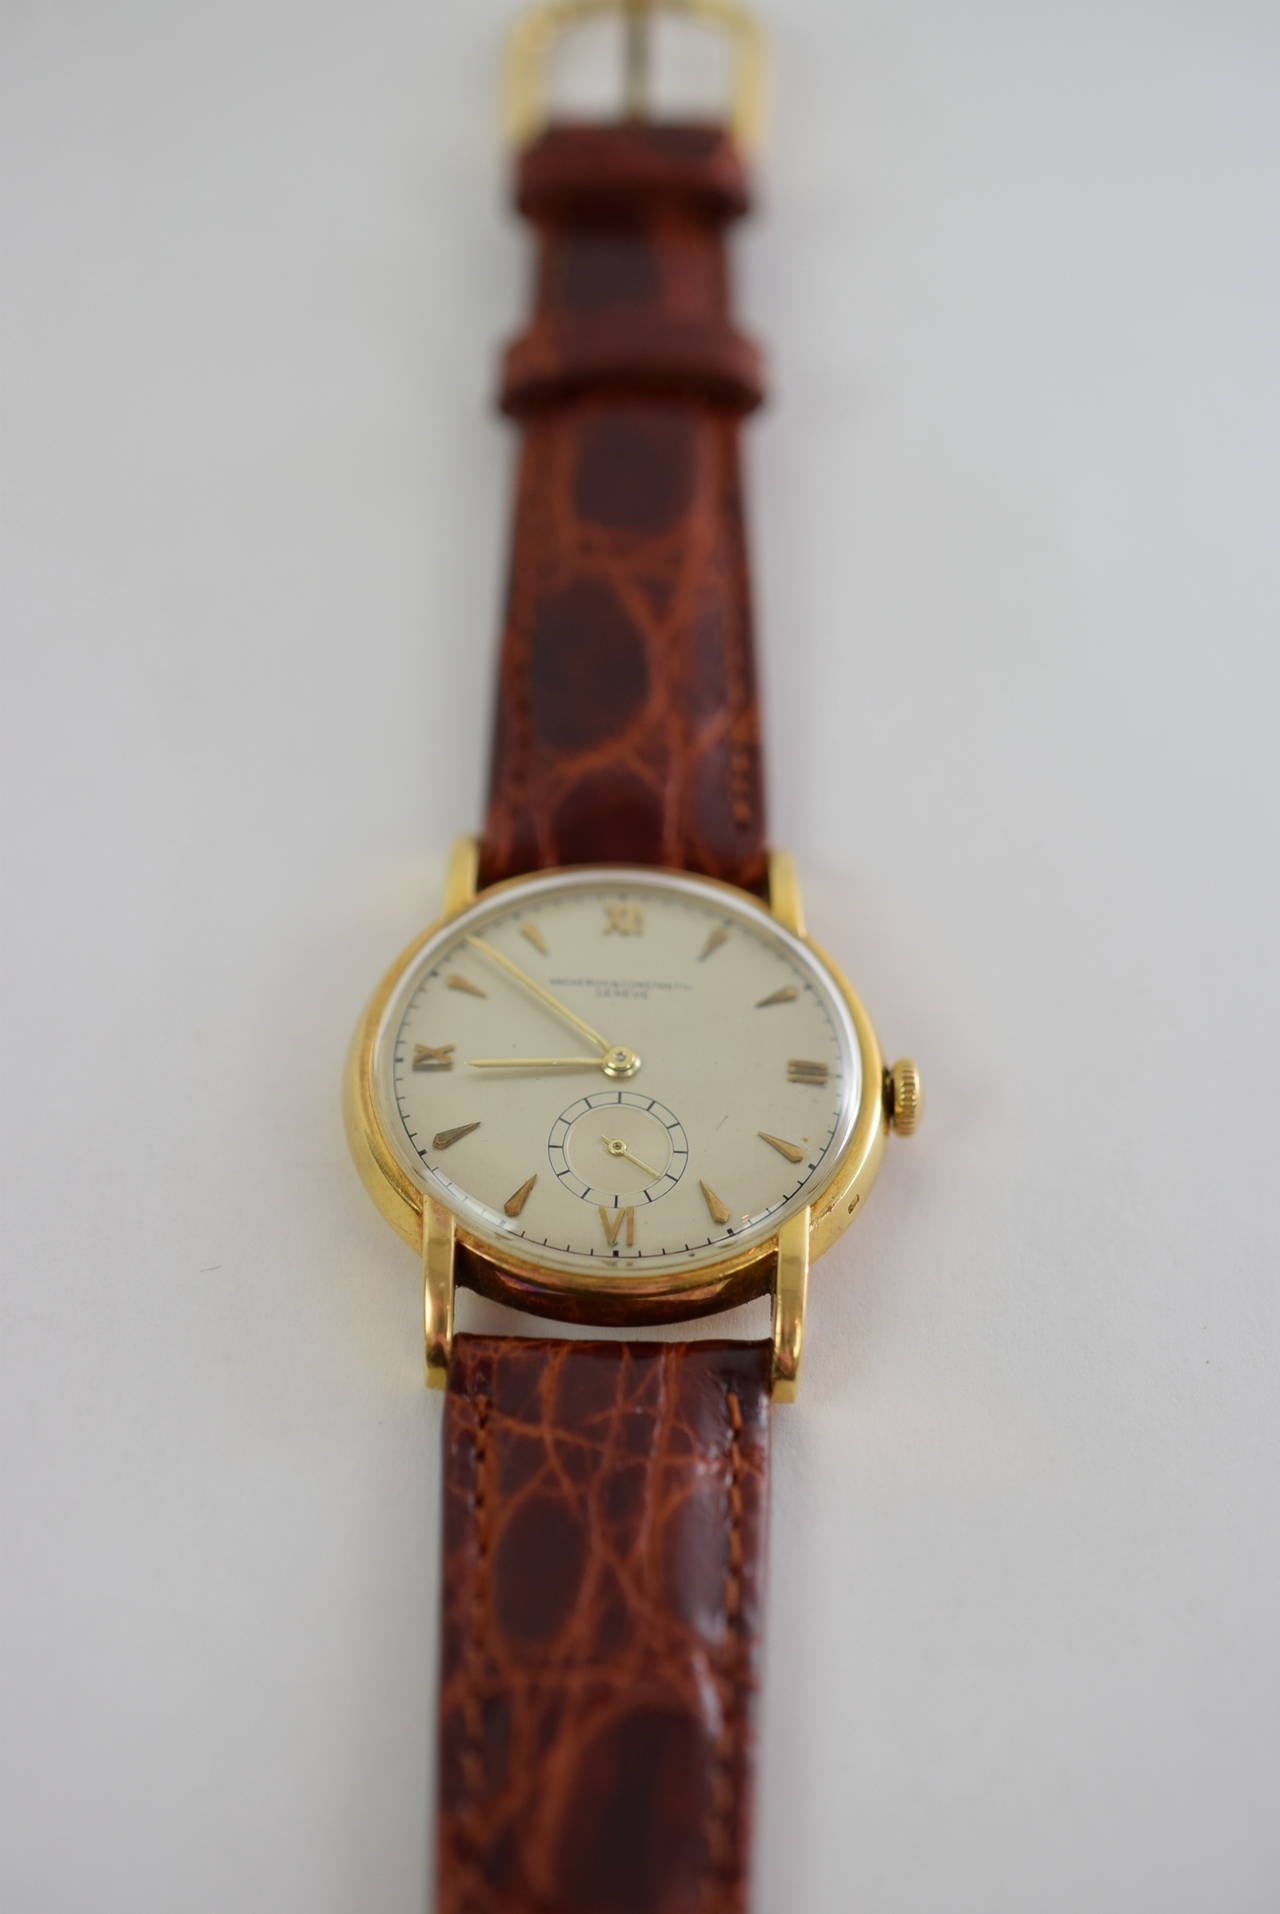 Vacheron Constantin 18K Yellow Gold, Manual Wind 1950s.
Very Good Condition. Original Dial Movement V 458.
De Beers Crocodile Strap Diameter 33.5 MM. 1/5/8 x 1 1/4.
Serial numbers: 3098xx. Warranted for one year from date of sale.